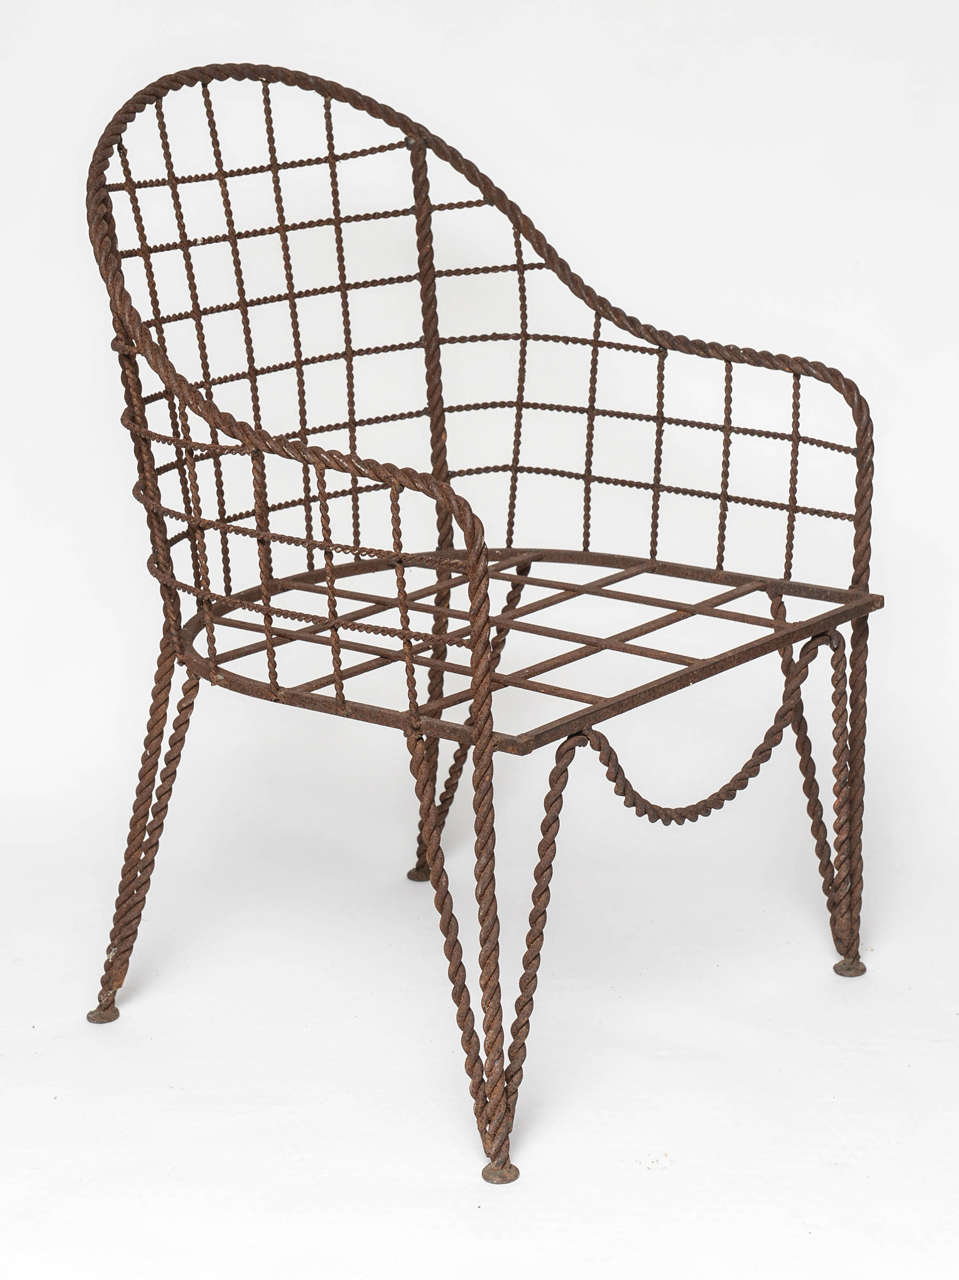 Exceptional and rare Rene Prou wrought iron chair with twisted work of iron as found condition.
